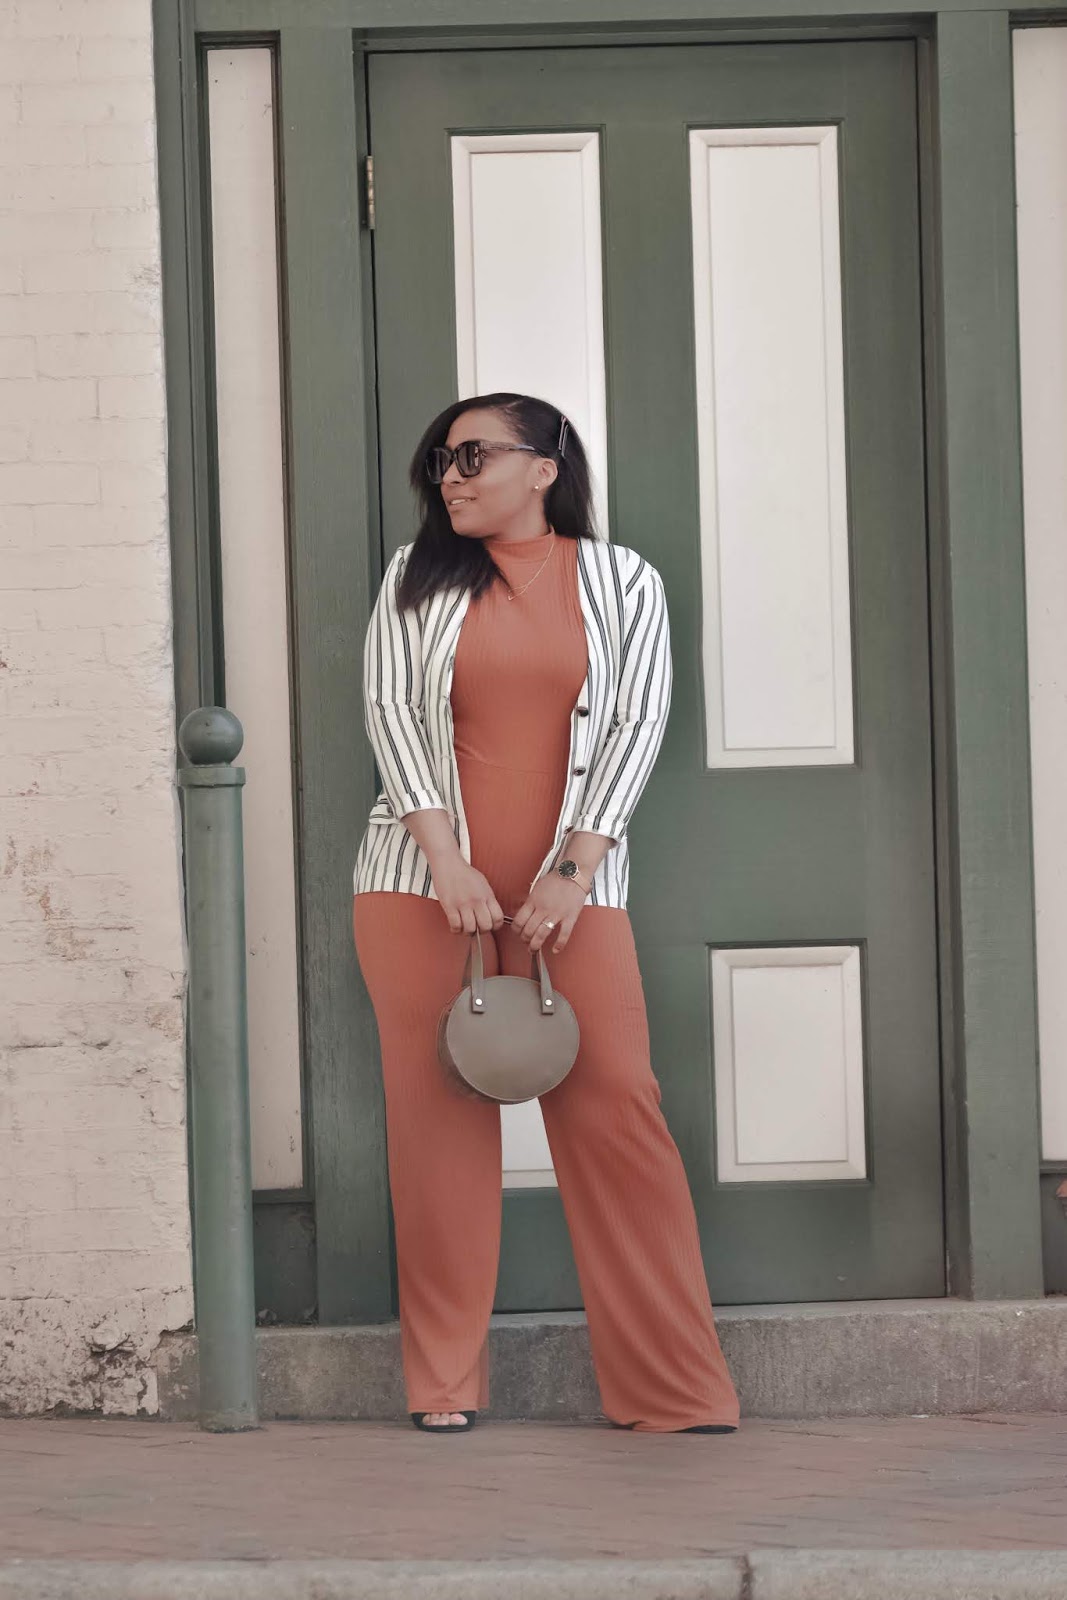 FemmeLuxe, jumpsuit, remix outfit, Coral jumpsuit, one piece, romper, streetstyle, stylish mom bloggers, summer outfit ideas, fanny pack trend